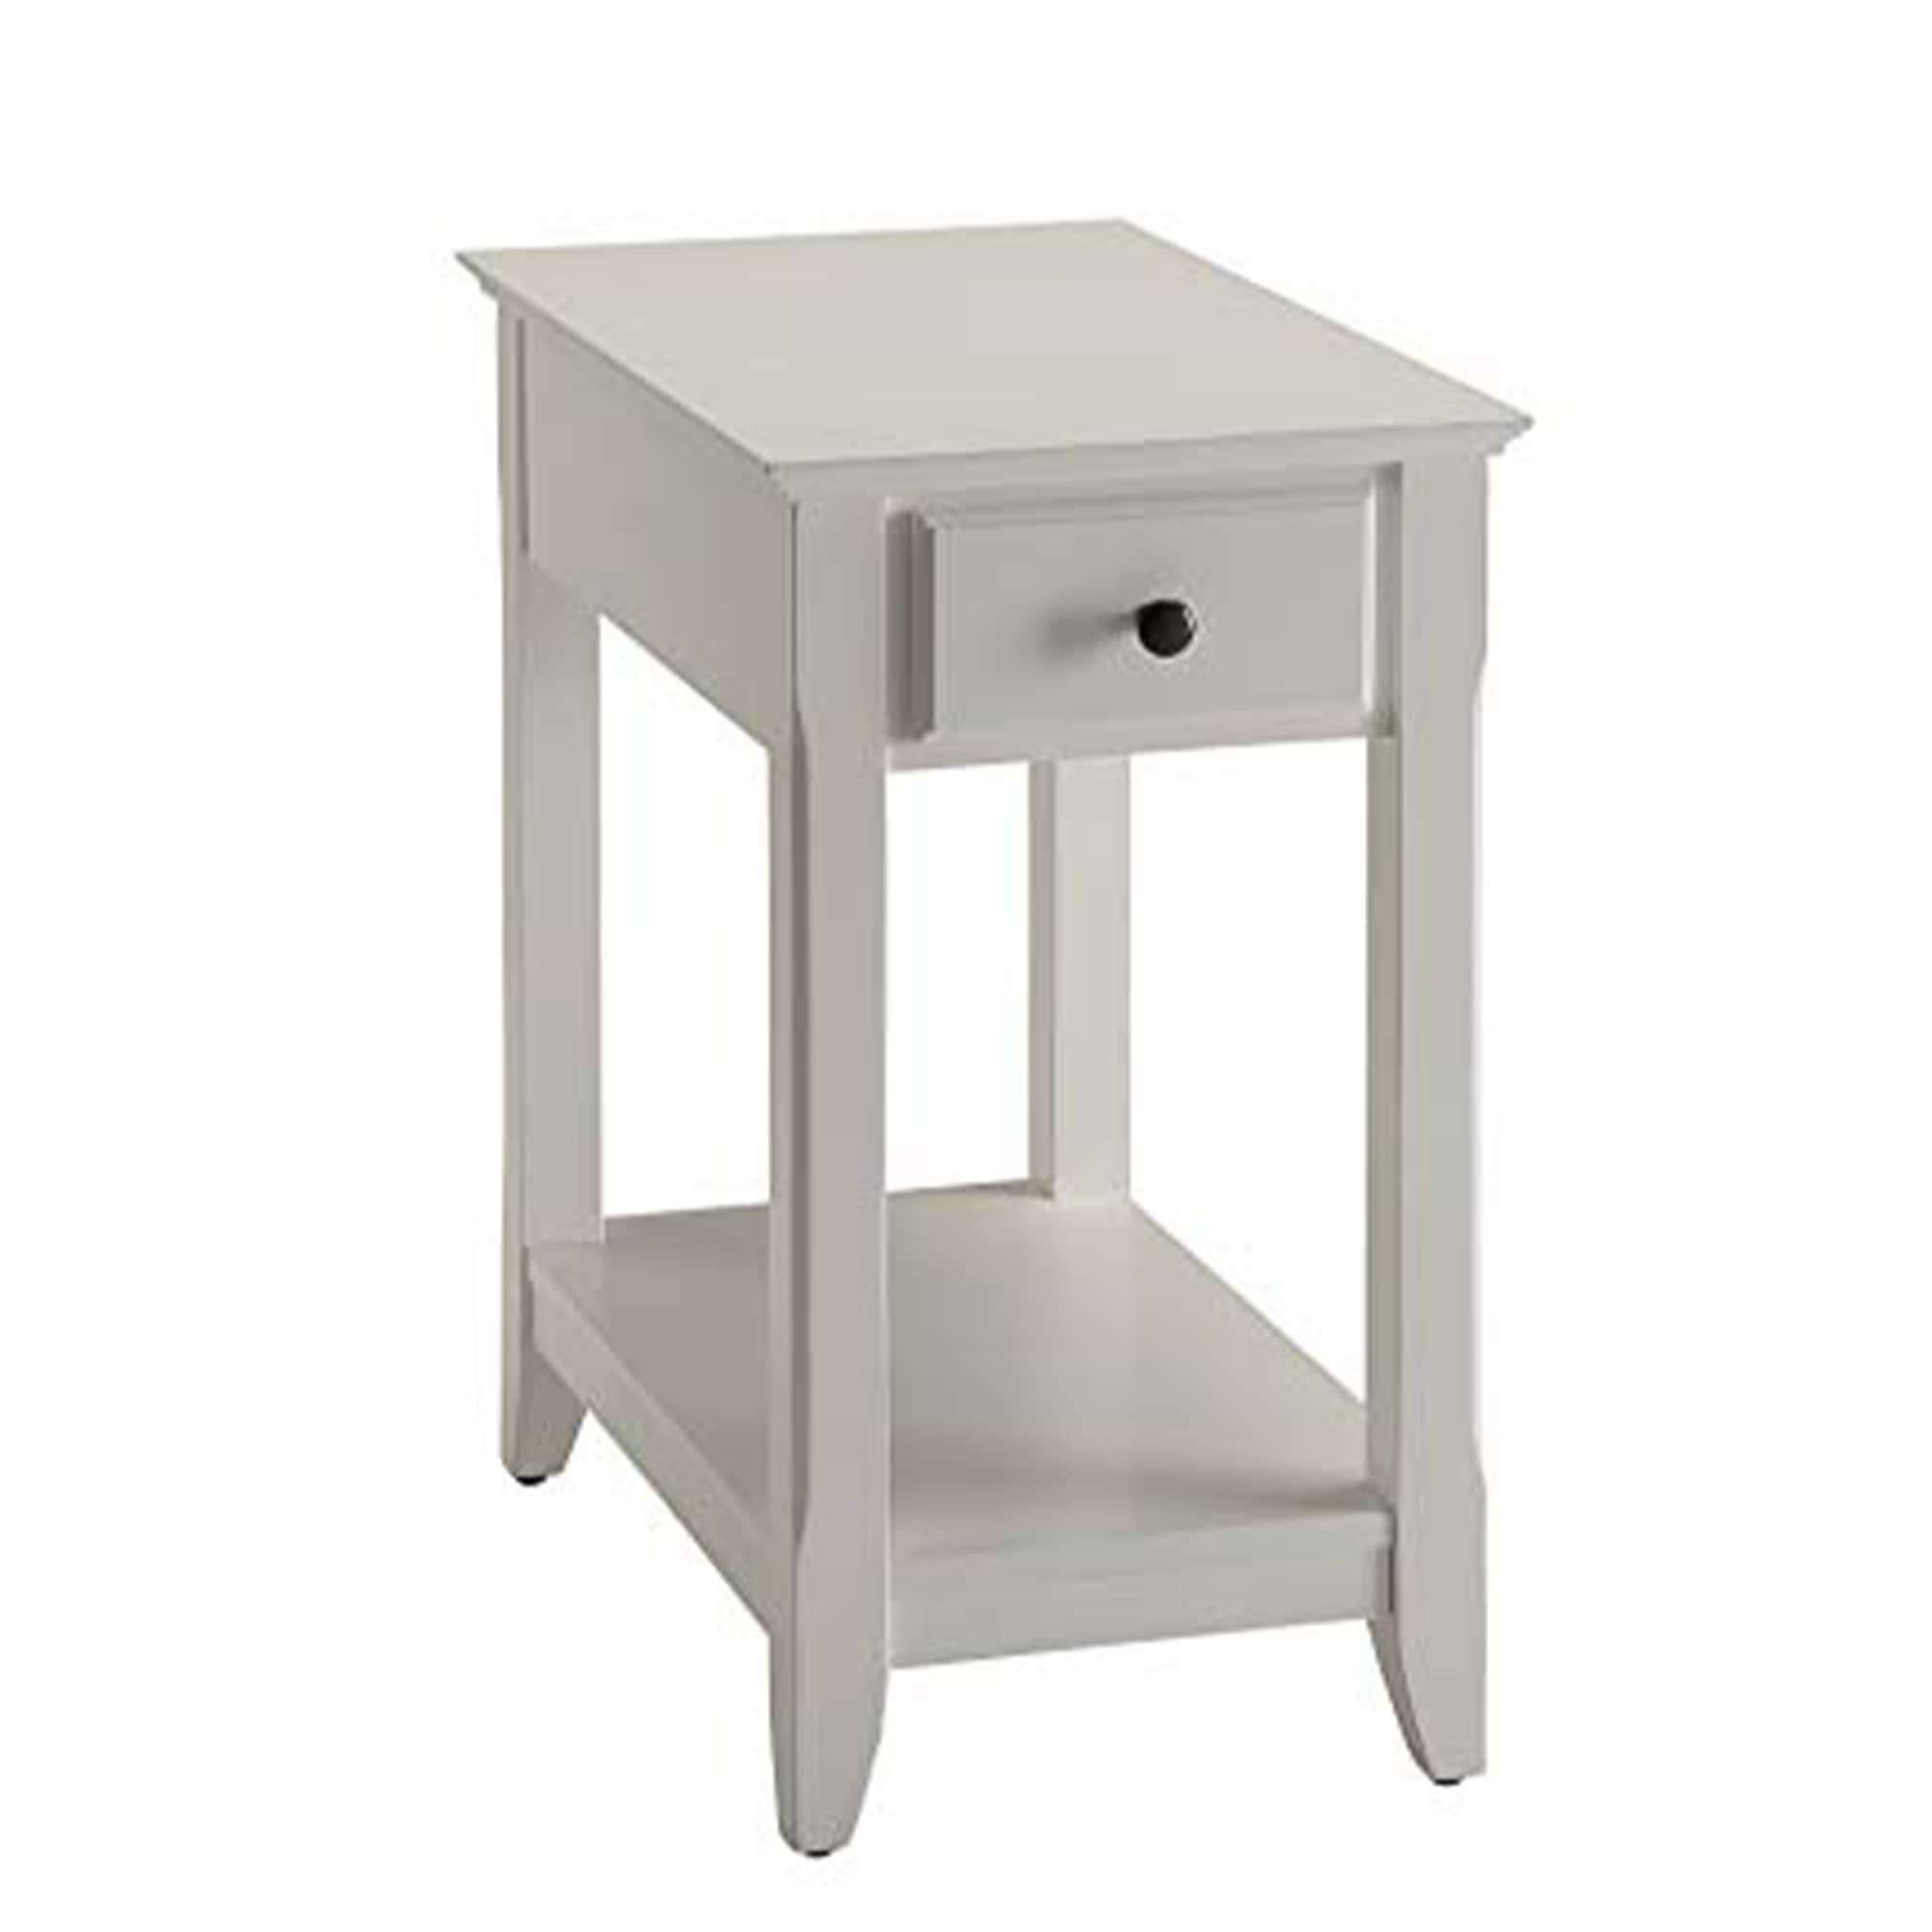 Affiable Side Table, White - 23 H x 22 W x 13 L Inches